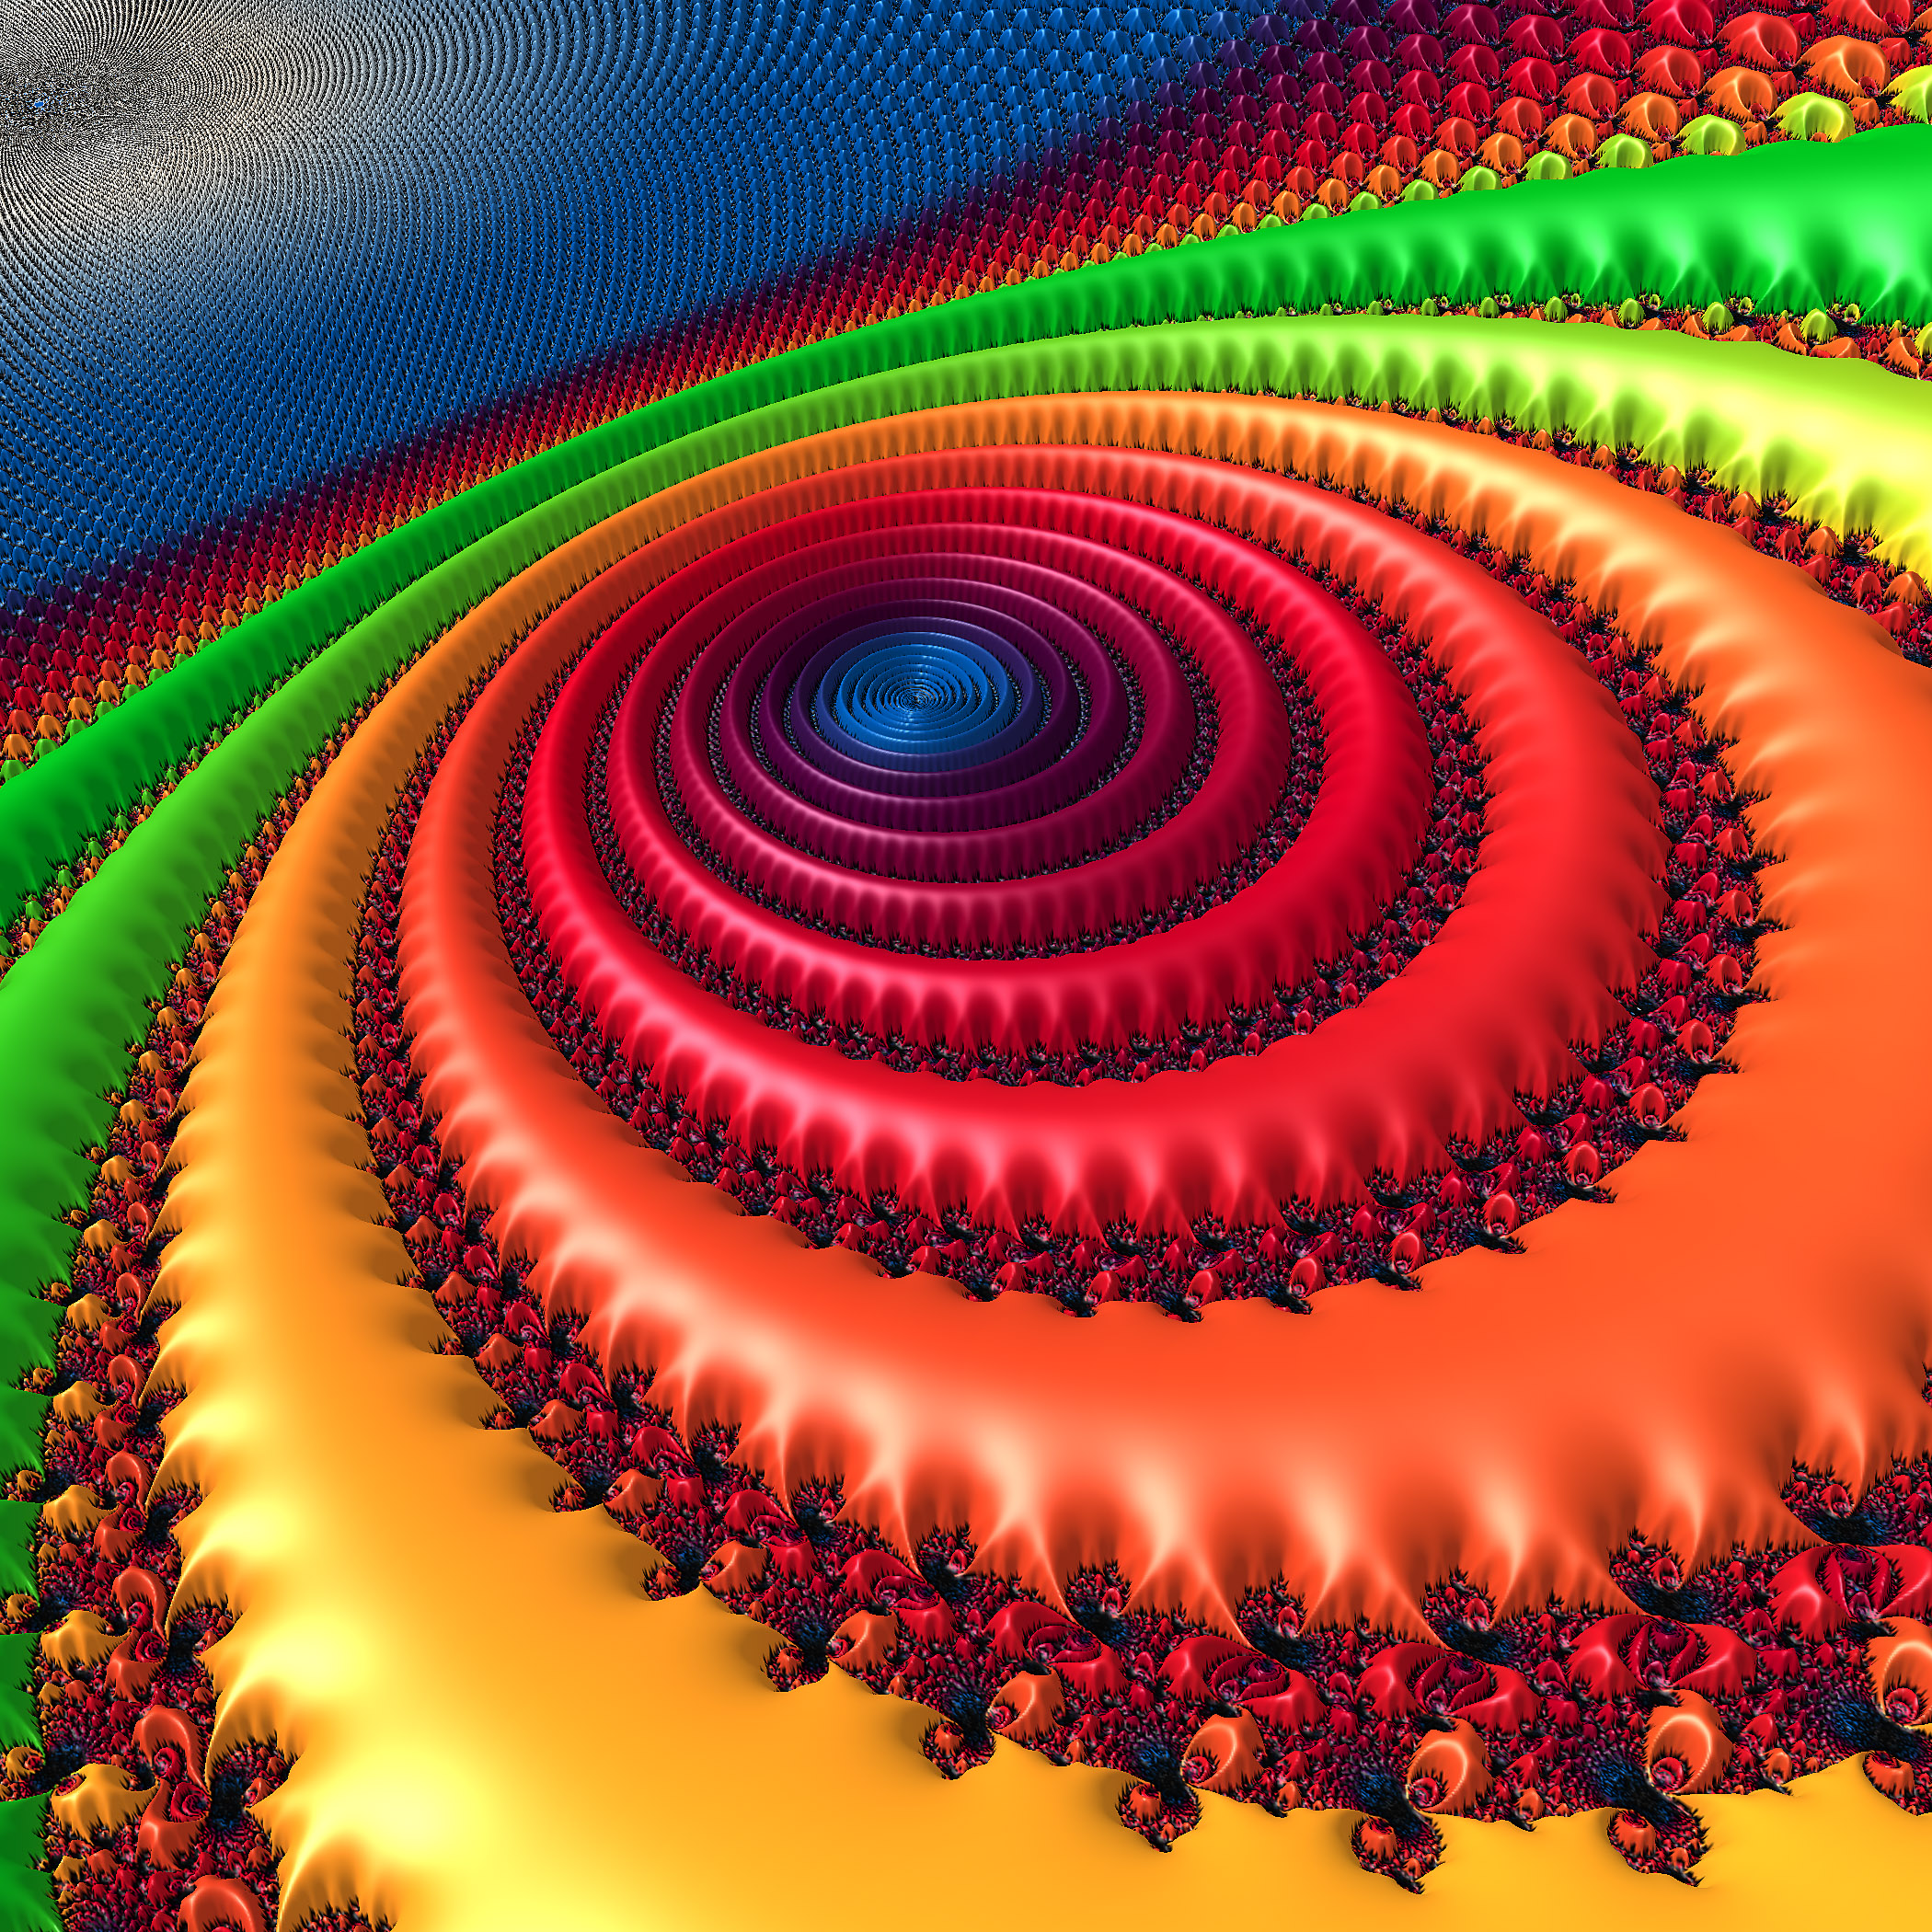 fractal, 3d, patterns, circles, multicolored, motley, rotation, spiral iphone wallpaper